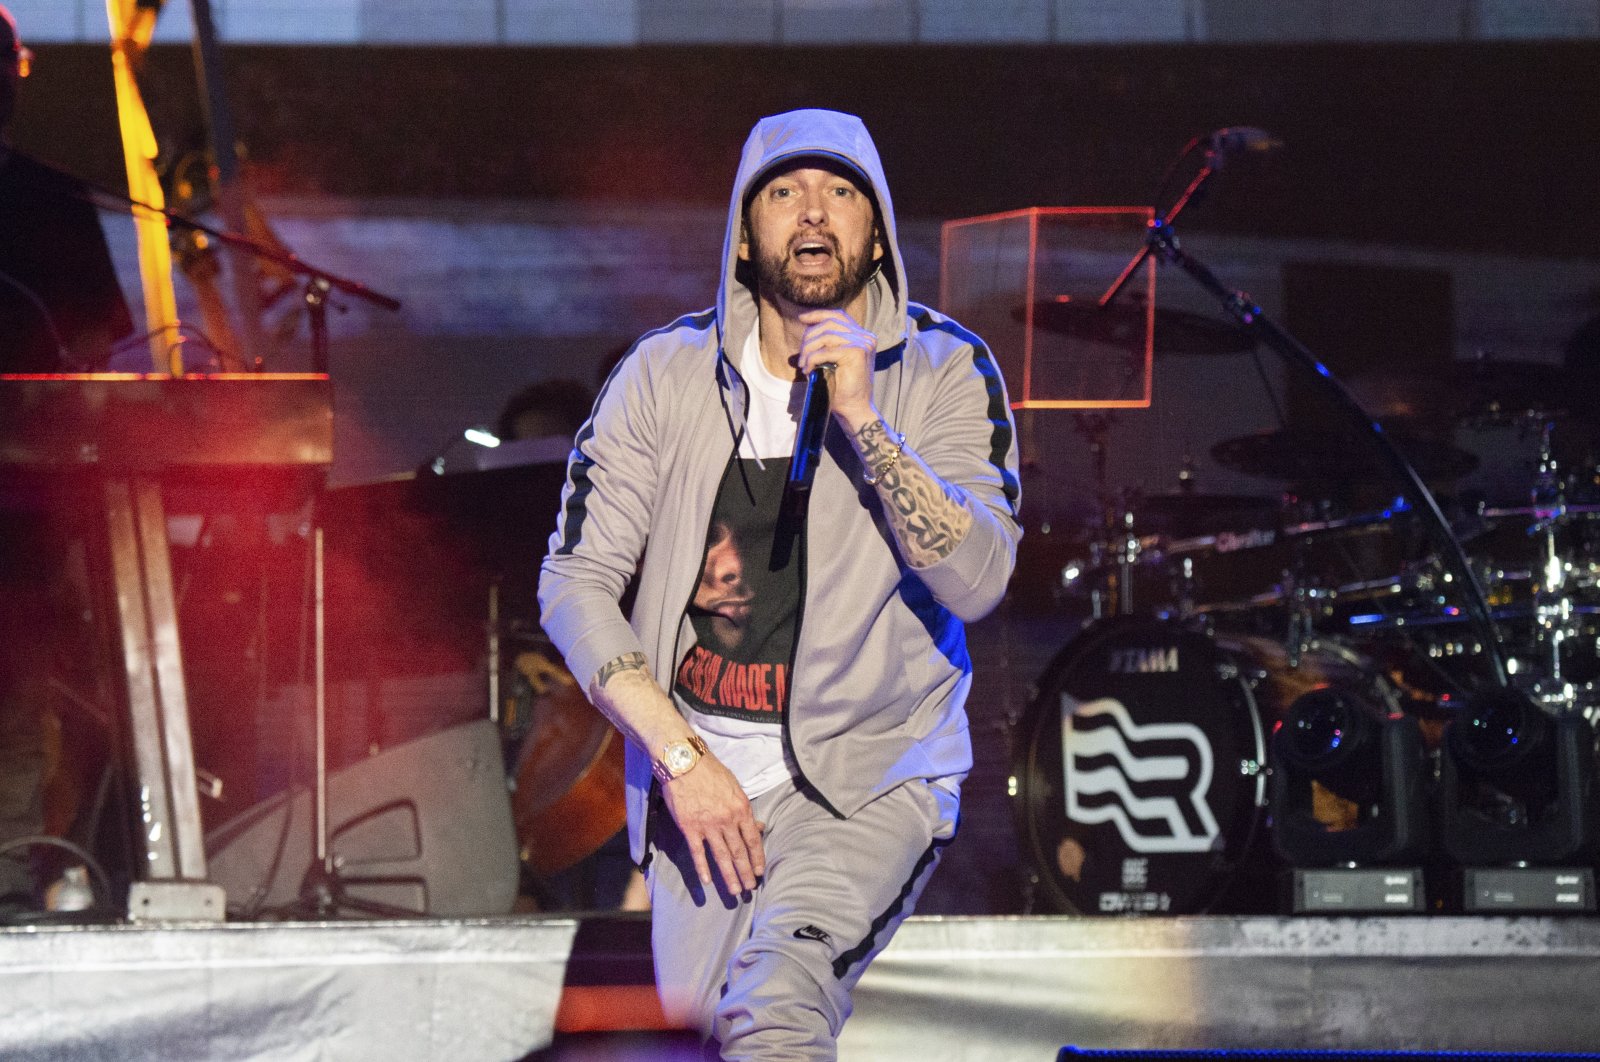 Eminem performs at the Bonnaroo Music and Arts Festival on June 9, 2018. (AP Photo)